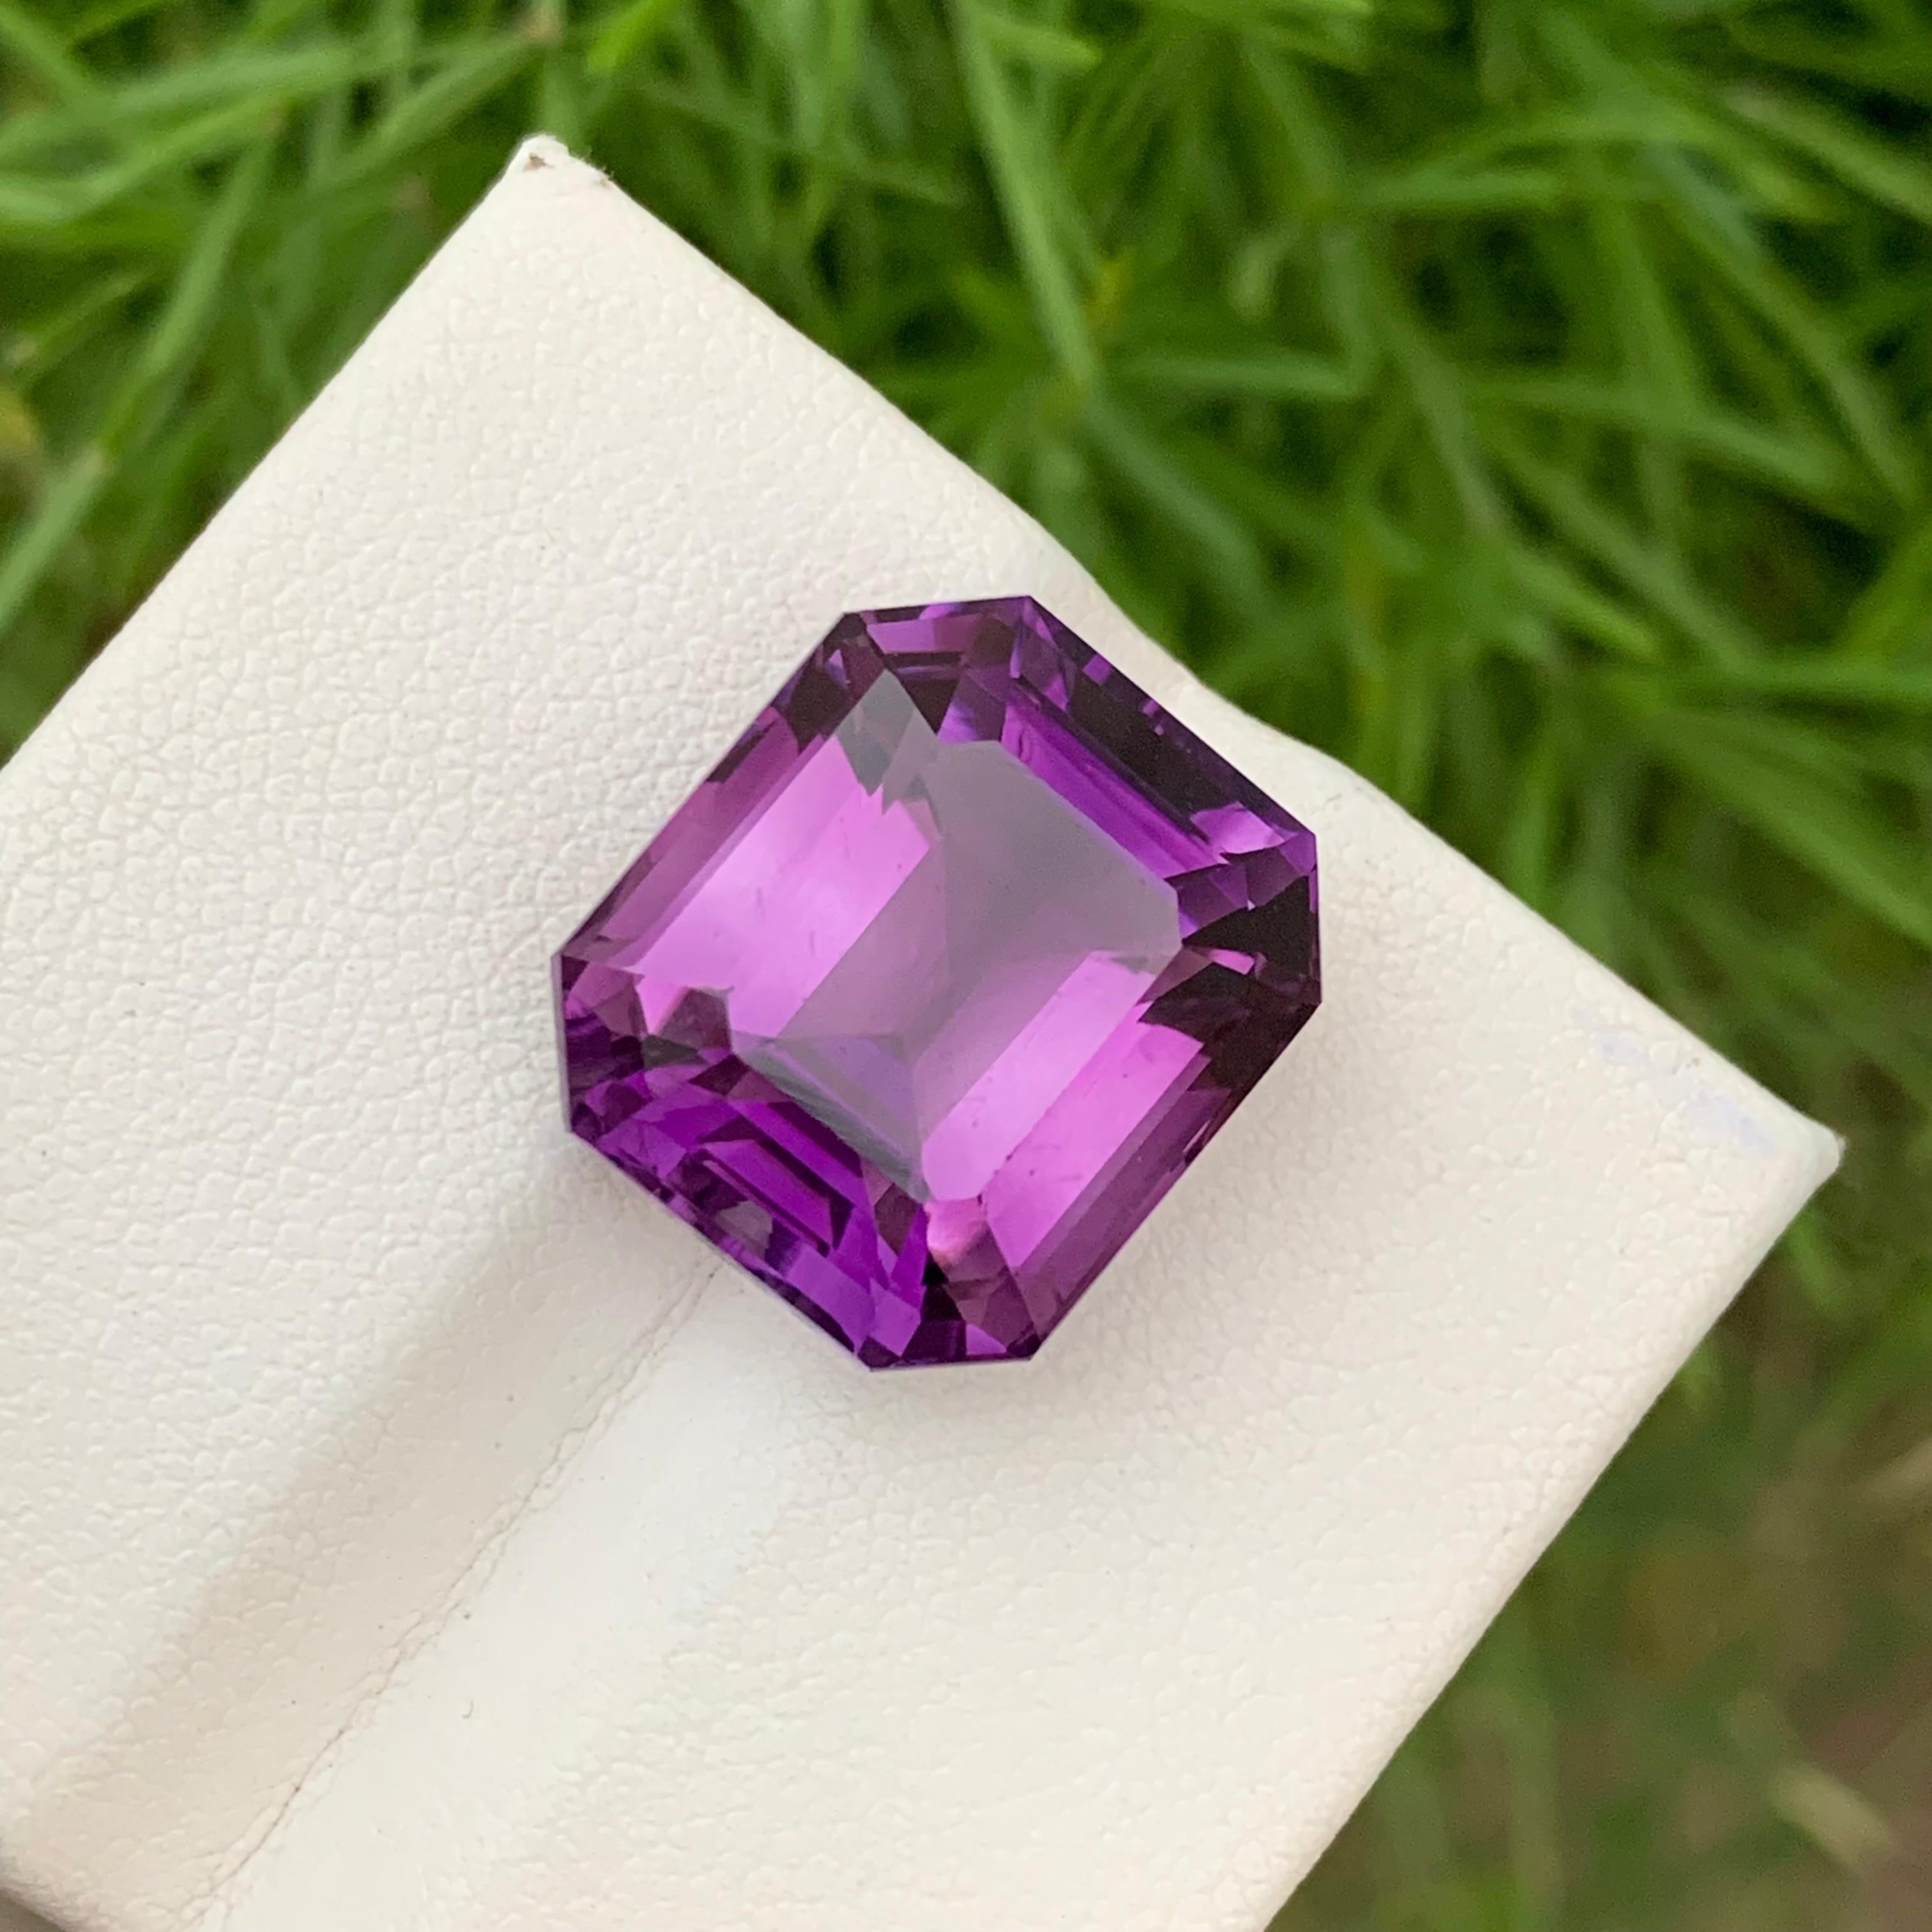 Loose Amethyst 
Weight: 19 Carats 
Dimension: 16.9x14.8x11.4 Mm
Origin; Brazil
Shape: Emerald 
Color: Purple
Treatment: Non
Amethyst is a stunning purple gemstone that has captivated people for centuries with its mesmerizing beauty. Its name is